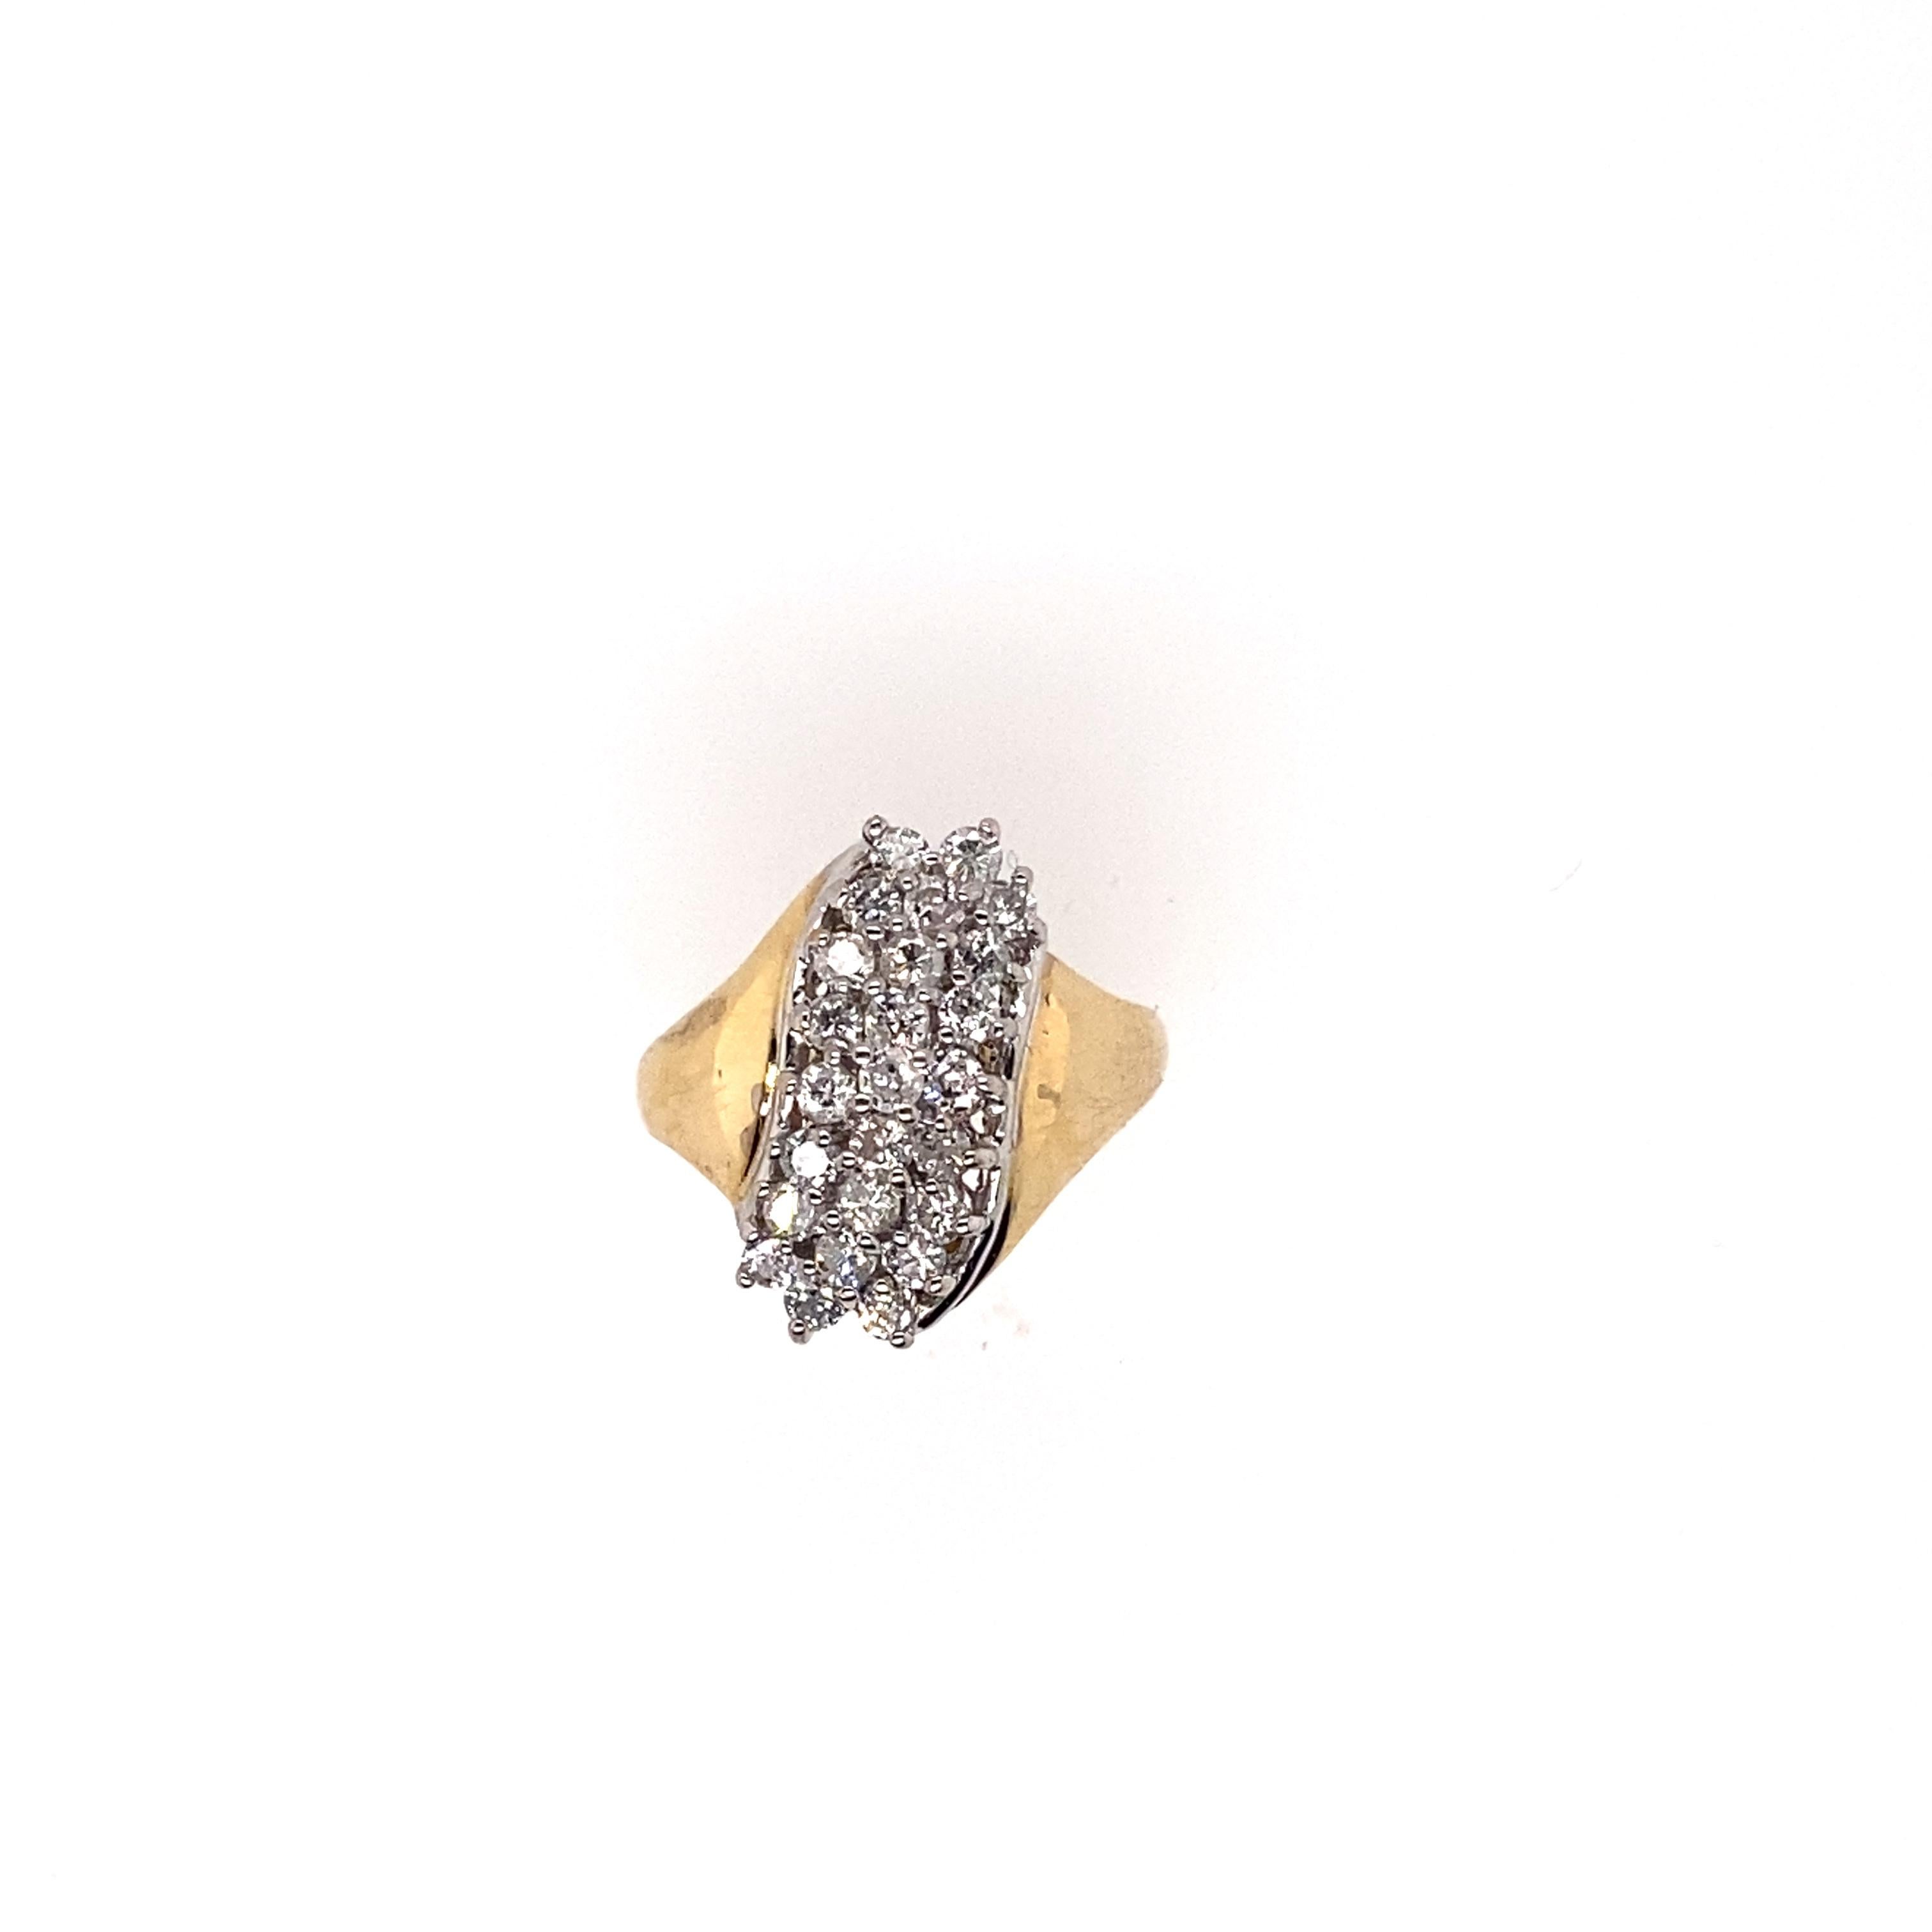 The twenty-five brilliant round diamonds set in the 14 Karat yellow gold ring featured by a cluster design. This ring features a very fashionable look and can be worn in everyday.

Diamonds Weight: 1.00 carat
Diamonds Shape : Brilliant